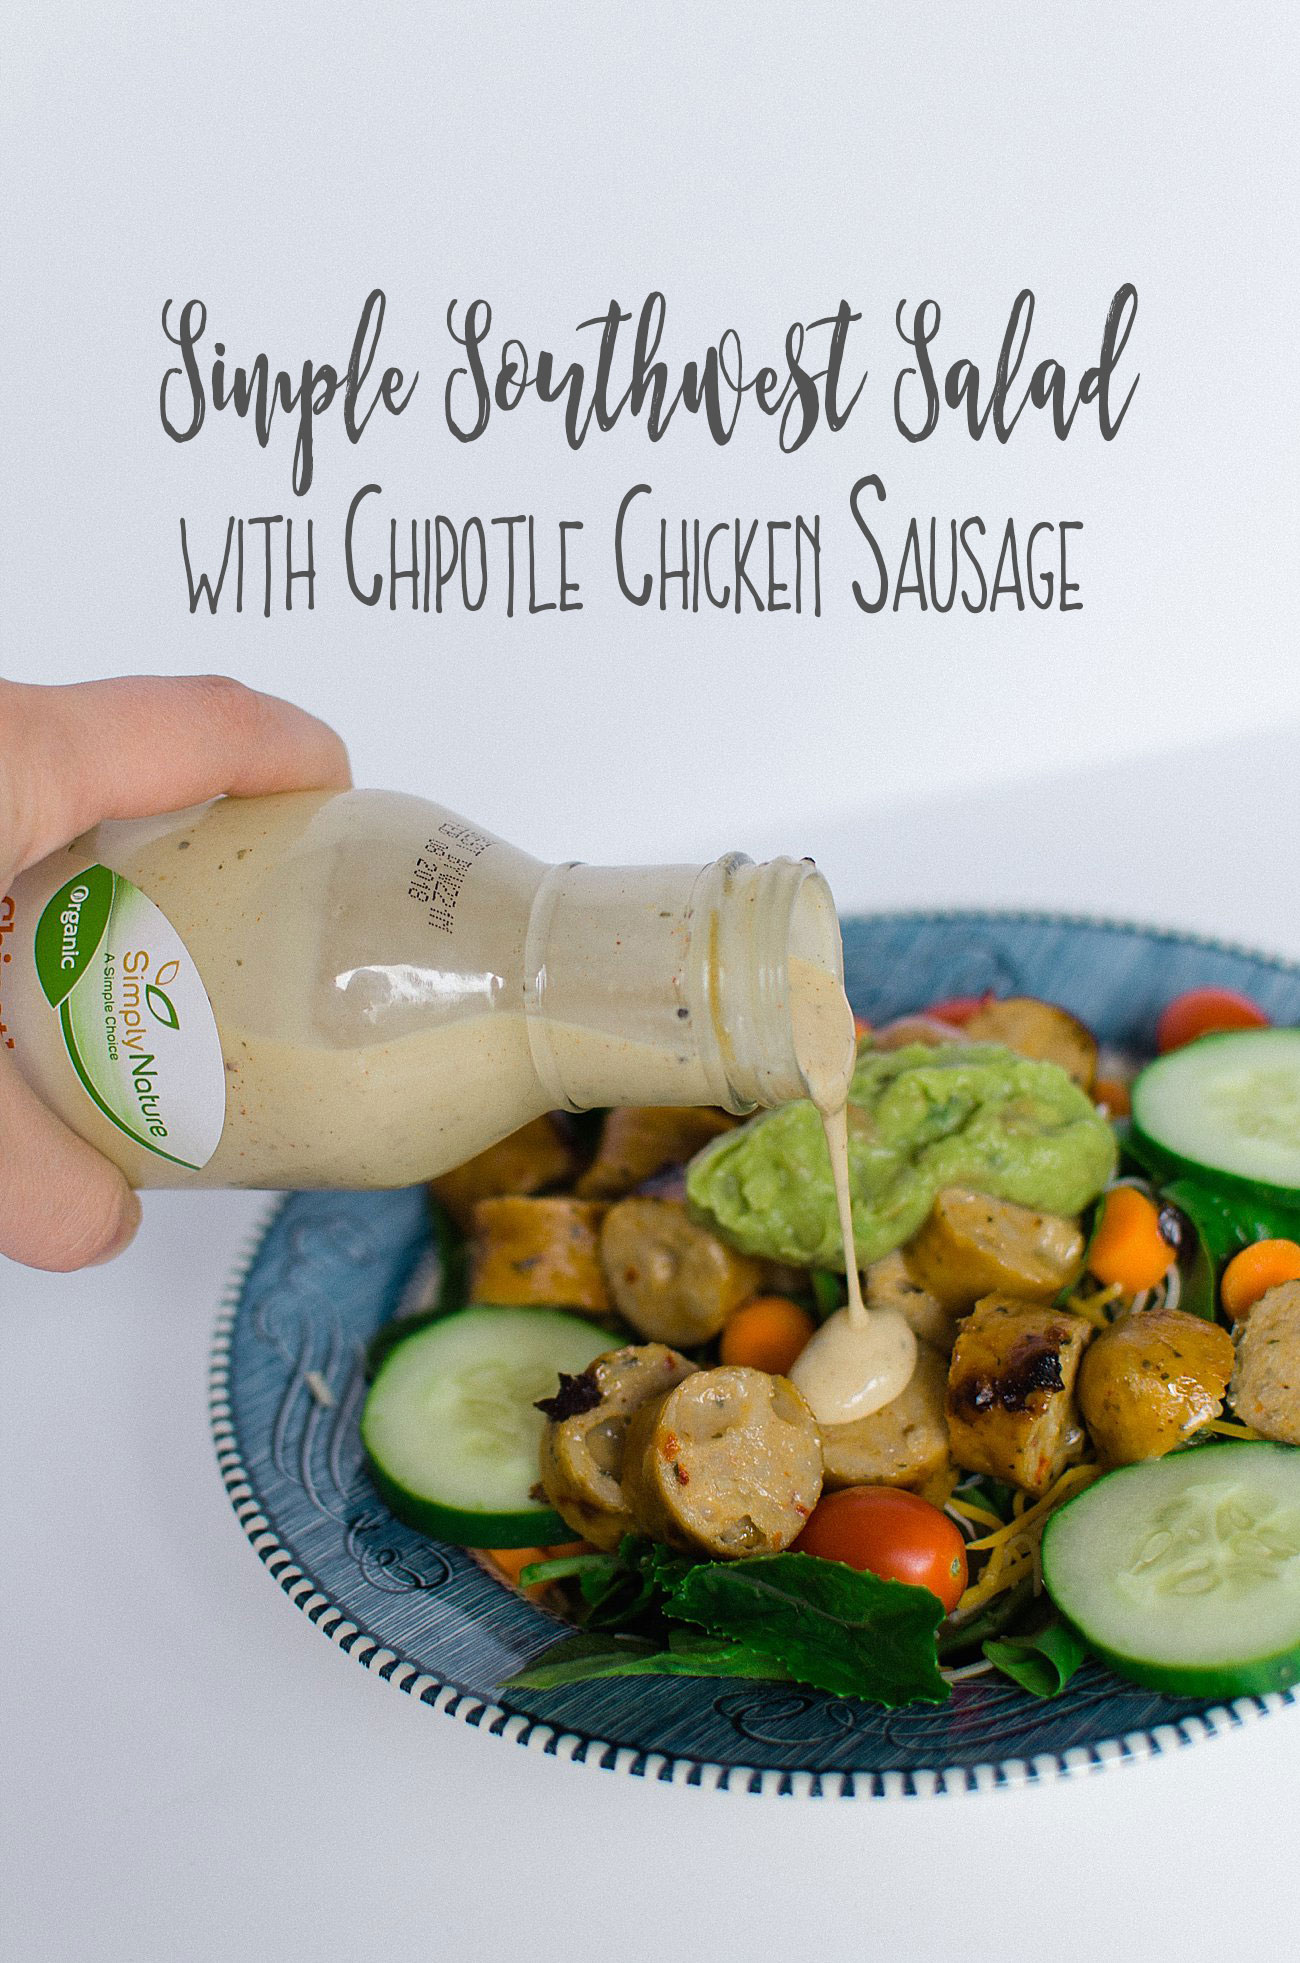 Simple Southwest Salad with Chipotle Chicken Sausage | RECIPE (1)